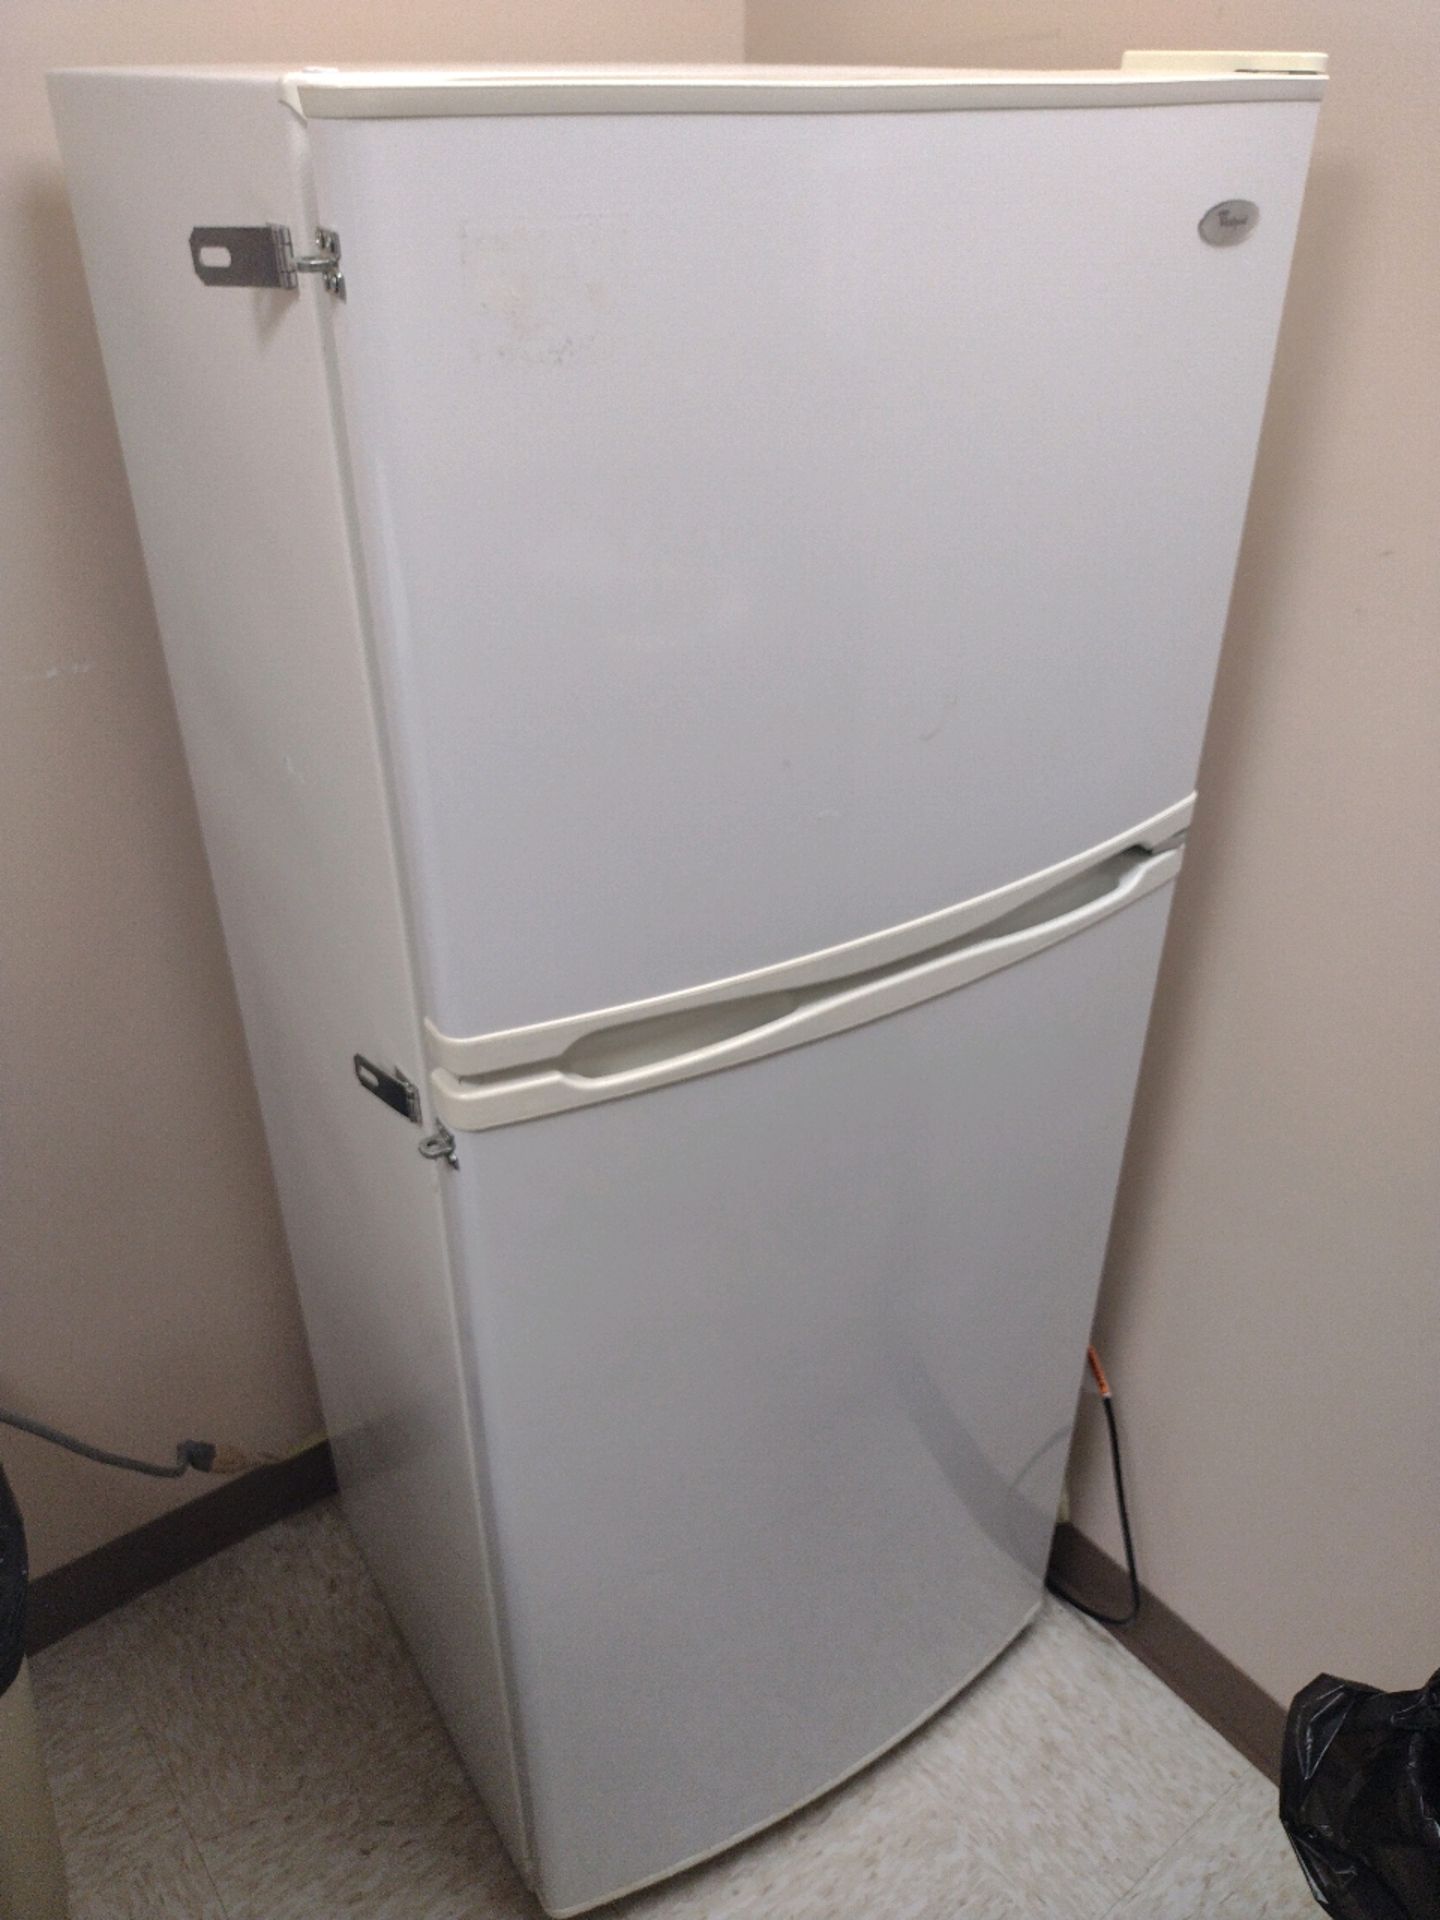 HOSHIZAKI ICE AND WATER DISPENSER WITH GE MICROWAVE, WHIRLPOOL REFIGERATOR/FREEZER, STAINLESS - Image 3 of 5